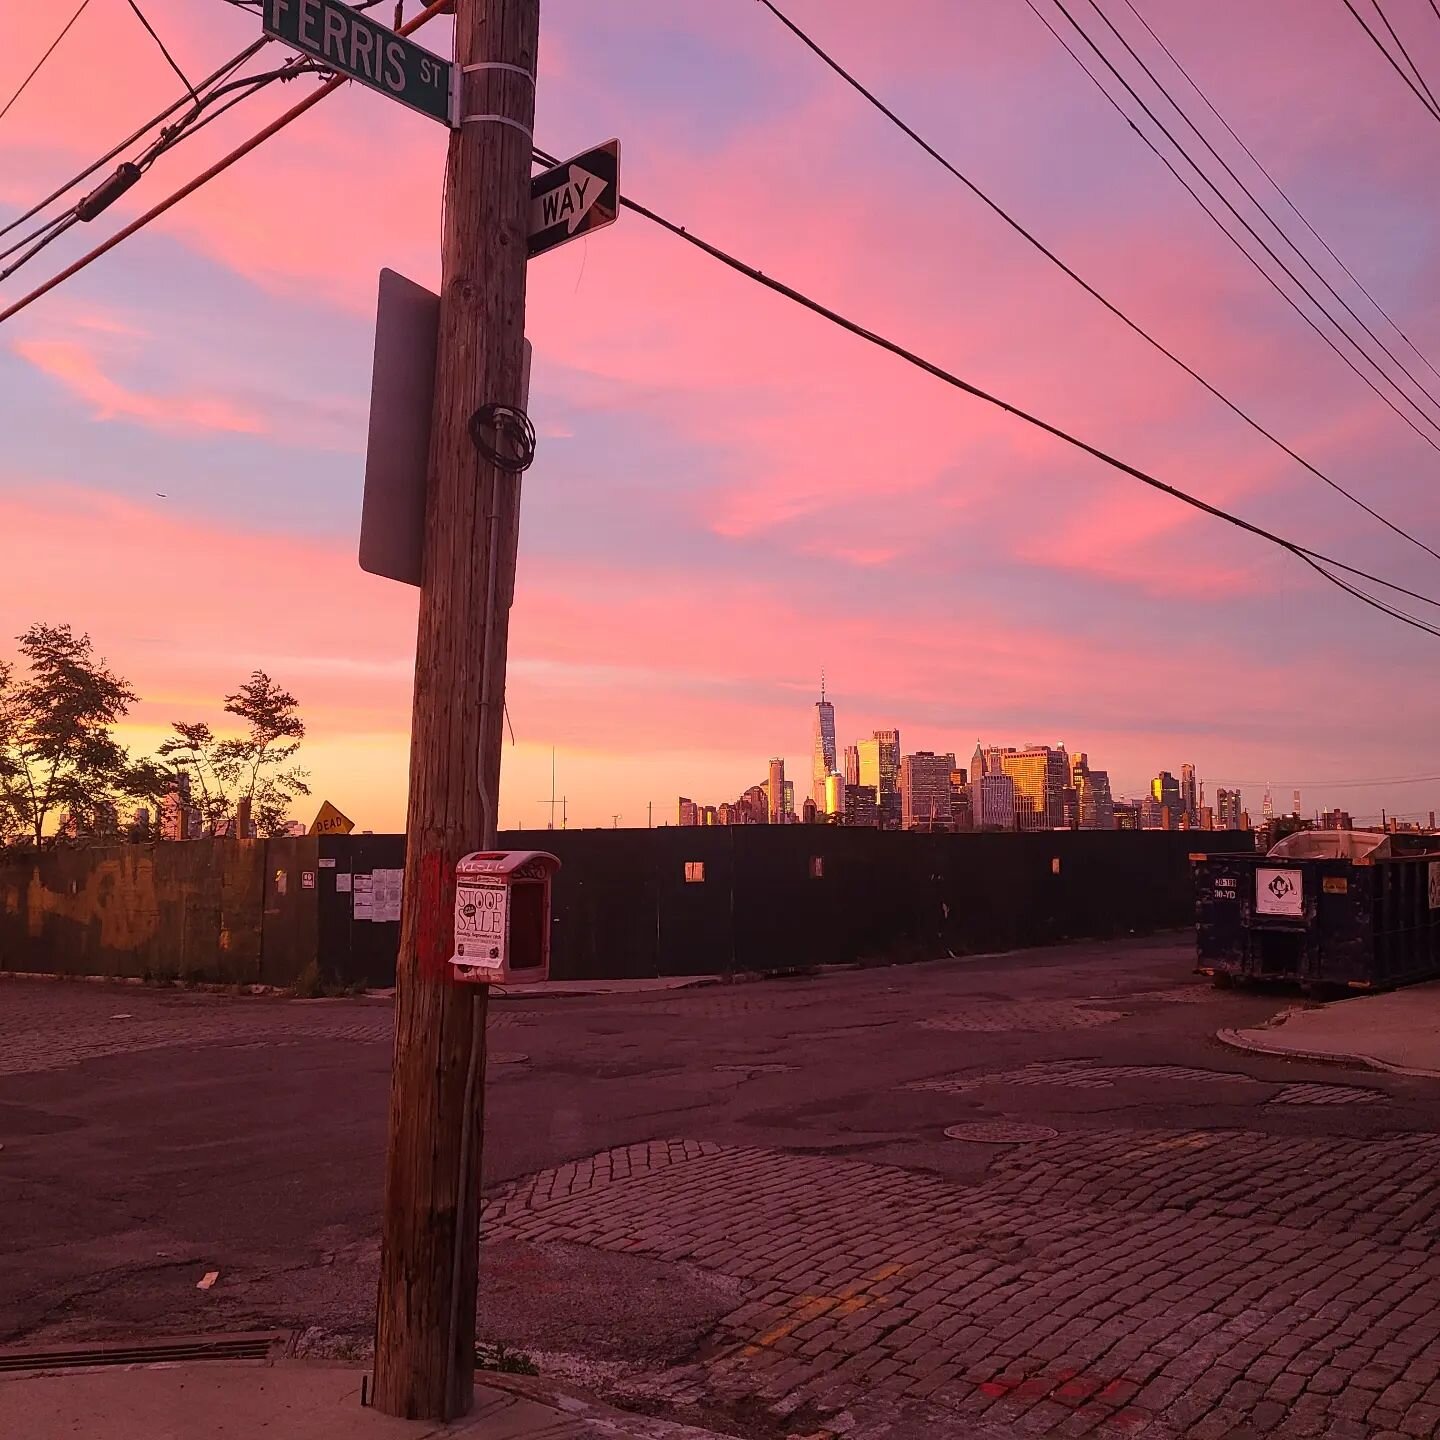 &quot;Under a Blood Red Sky&quot; resuming fall/winter hours Wed-Sunday 5pm-10pm #friday #weekend #pizzaromana #patio #pizza #outdoordining #skyline #woodfiredpizza #brooklyn #brickovenpizza #bar #coffeystreet #cocktails #Redhook #nyceats #nycrestaur